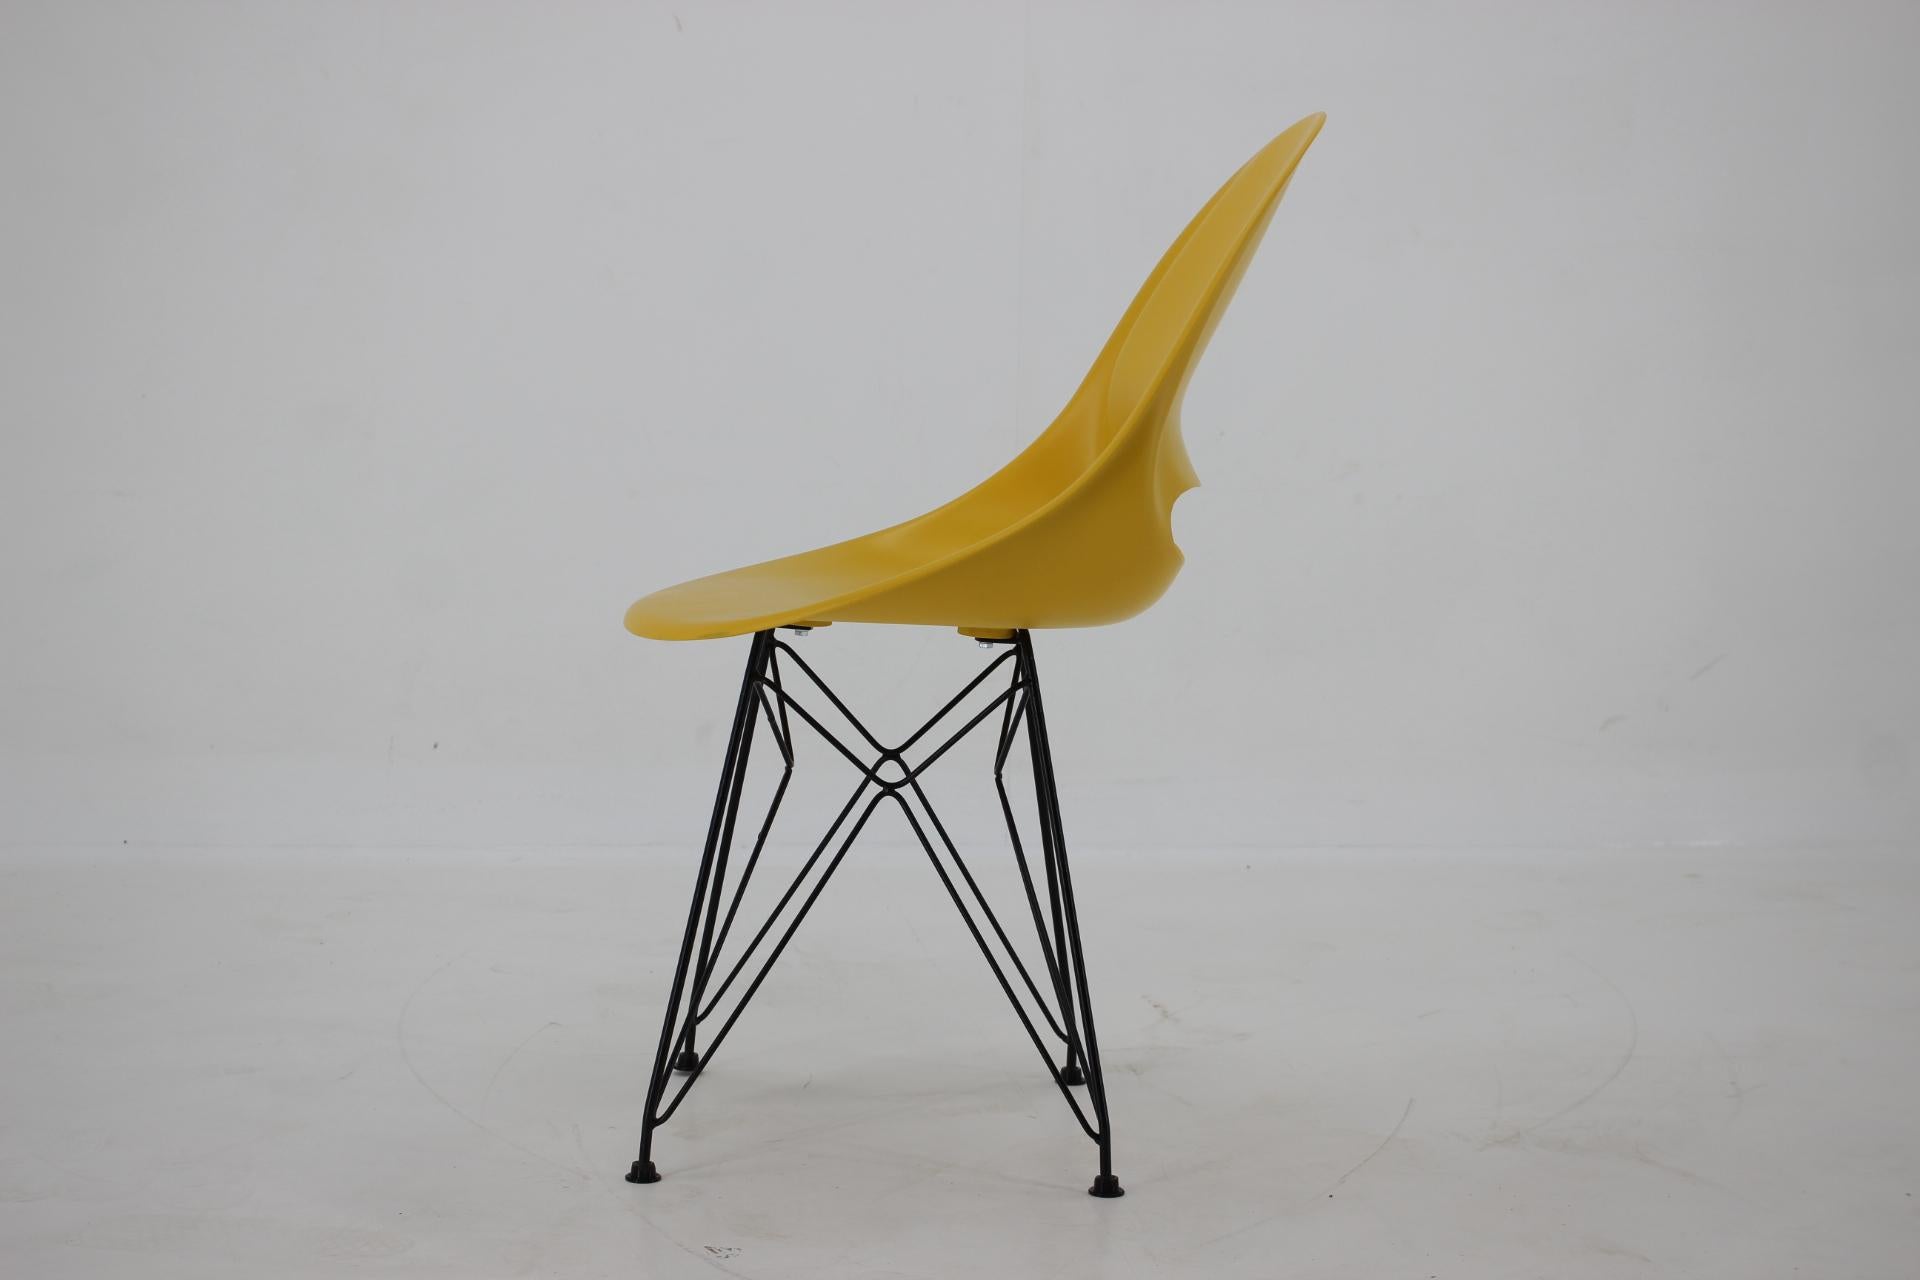 Set of 4 Midcentury Yellow Design Fiberglass Dining Chairs by M.Navratil, 1960s For Sale 4